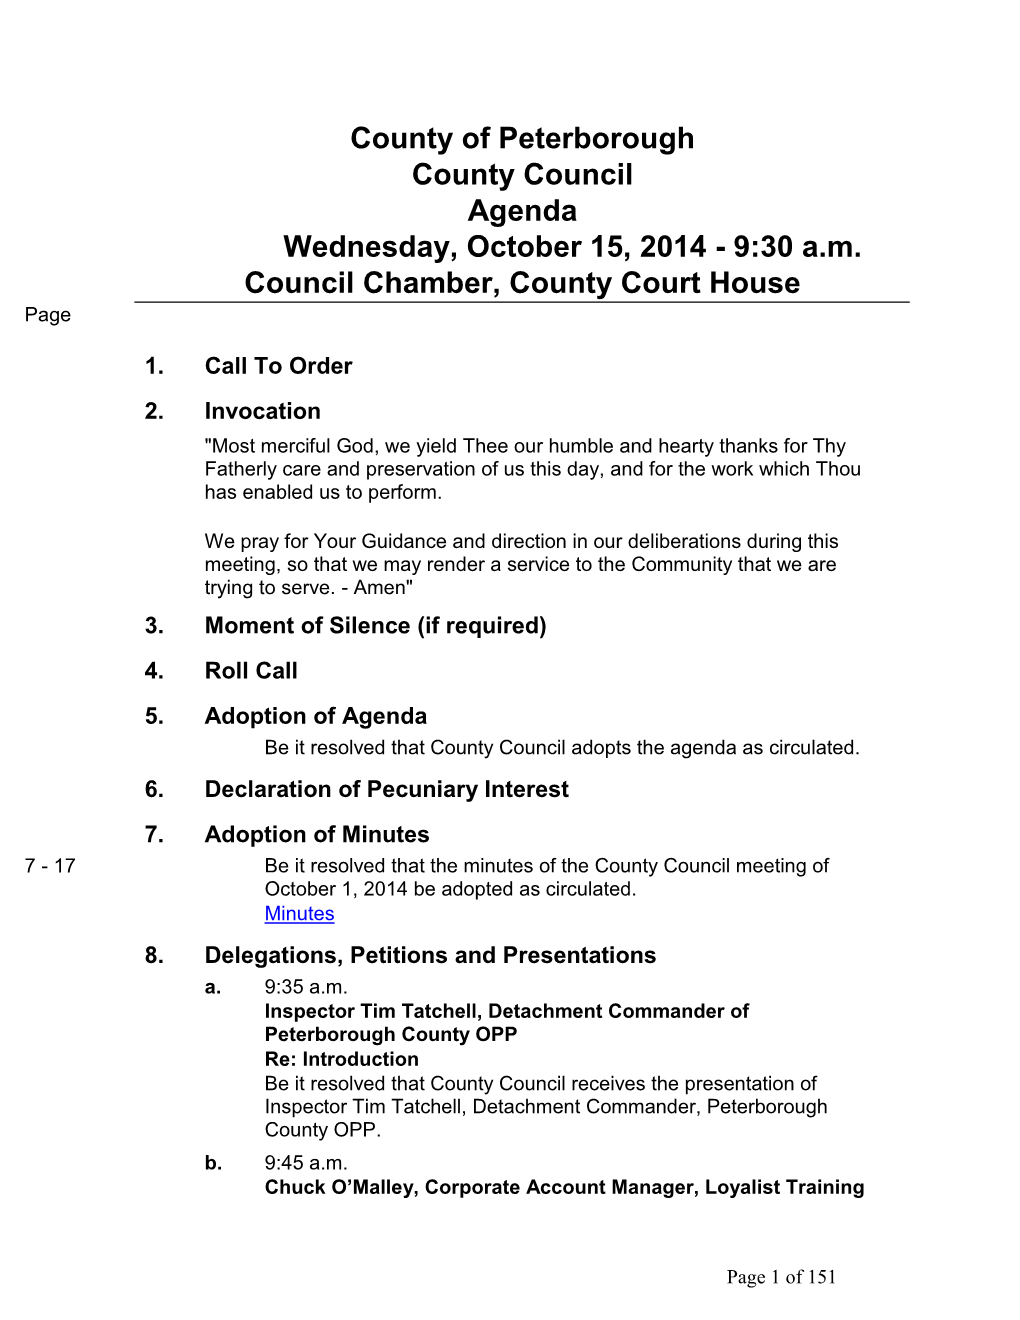 County of Peterborough County Council Agenda Wednesday, October 15, 2014 - 9:30 A.M